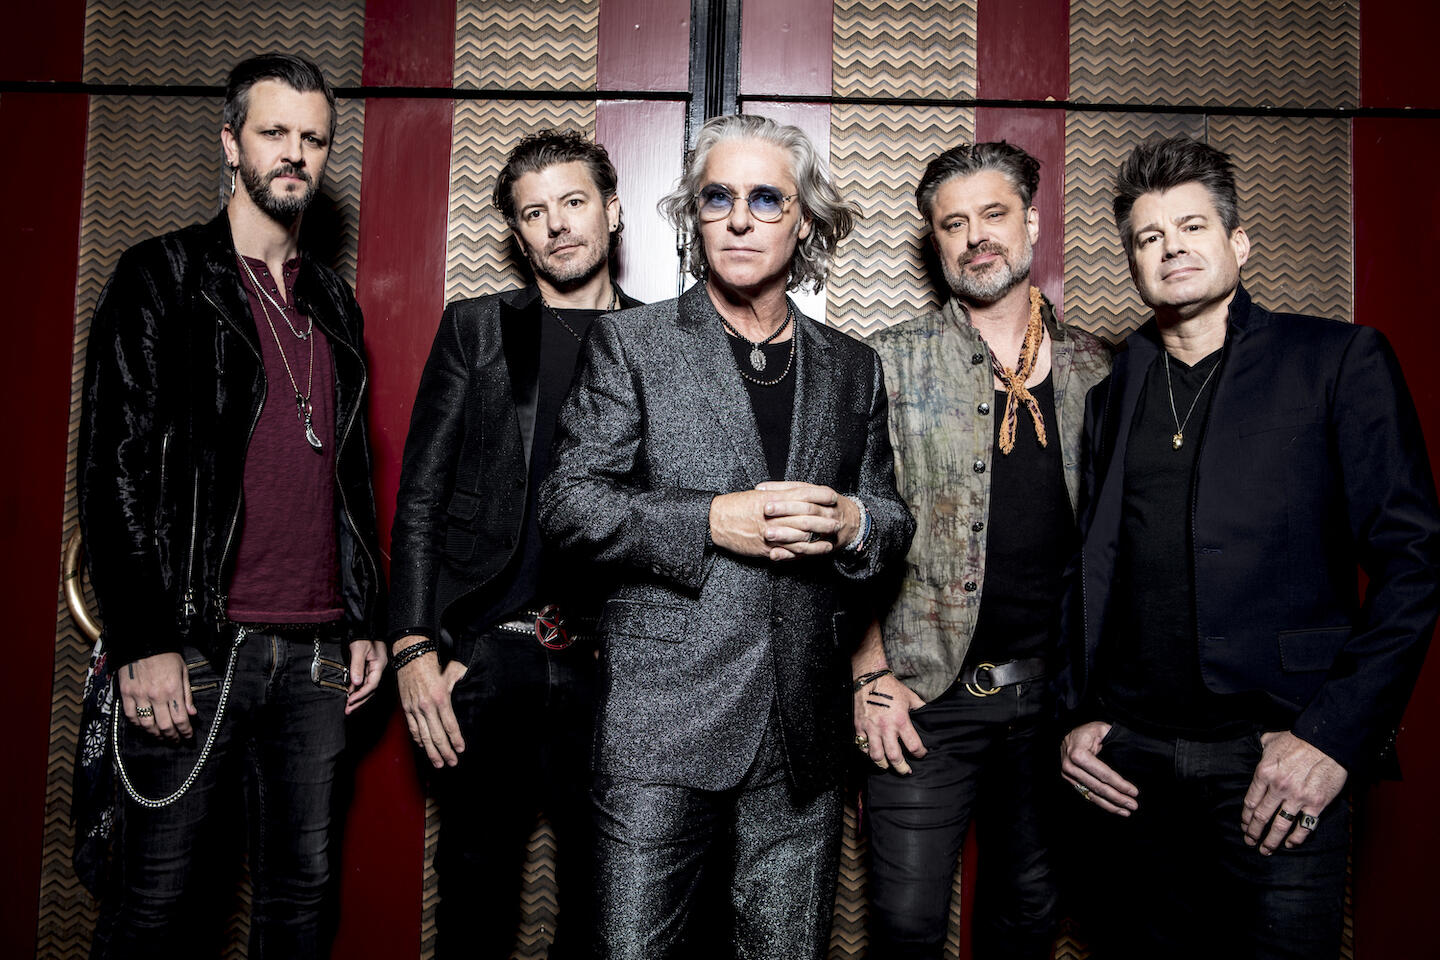 Ed Roland On Why Collective Soul Is So 'Strange' For A Rock Band iHeart